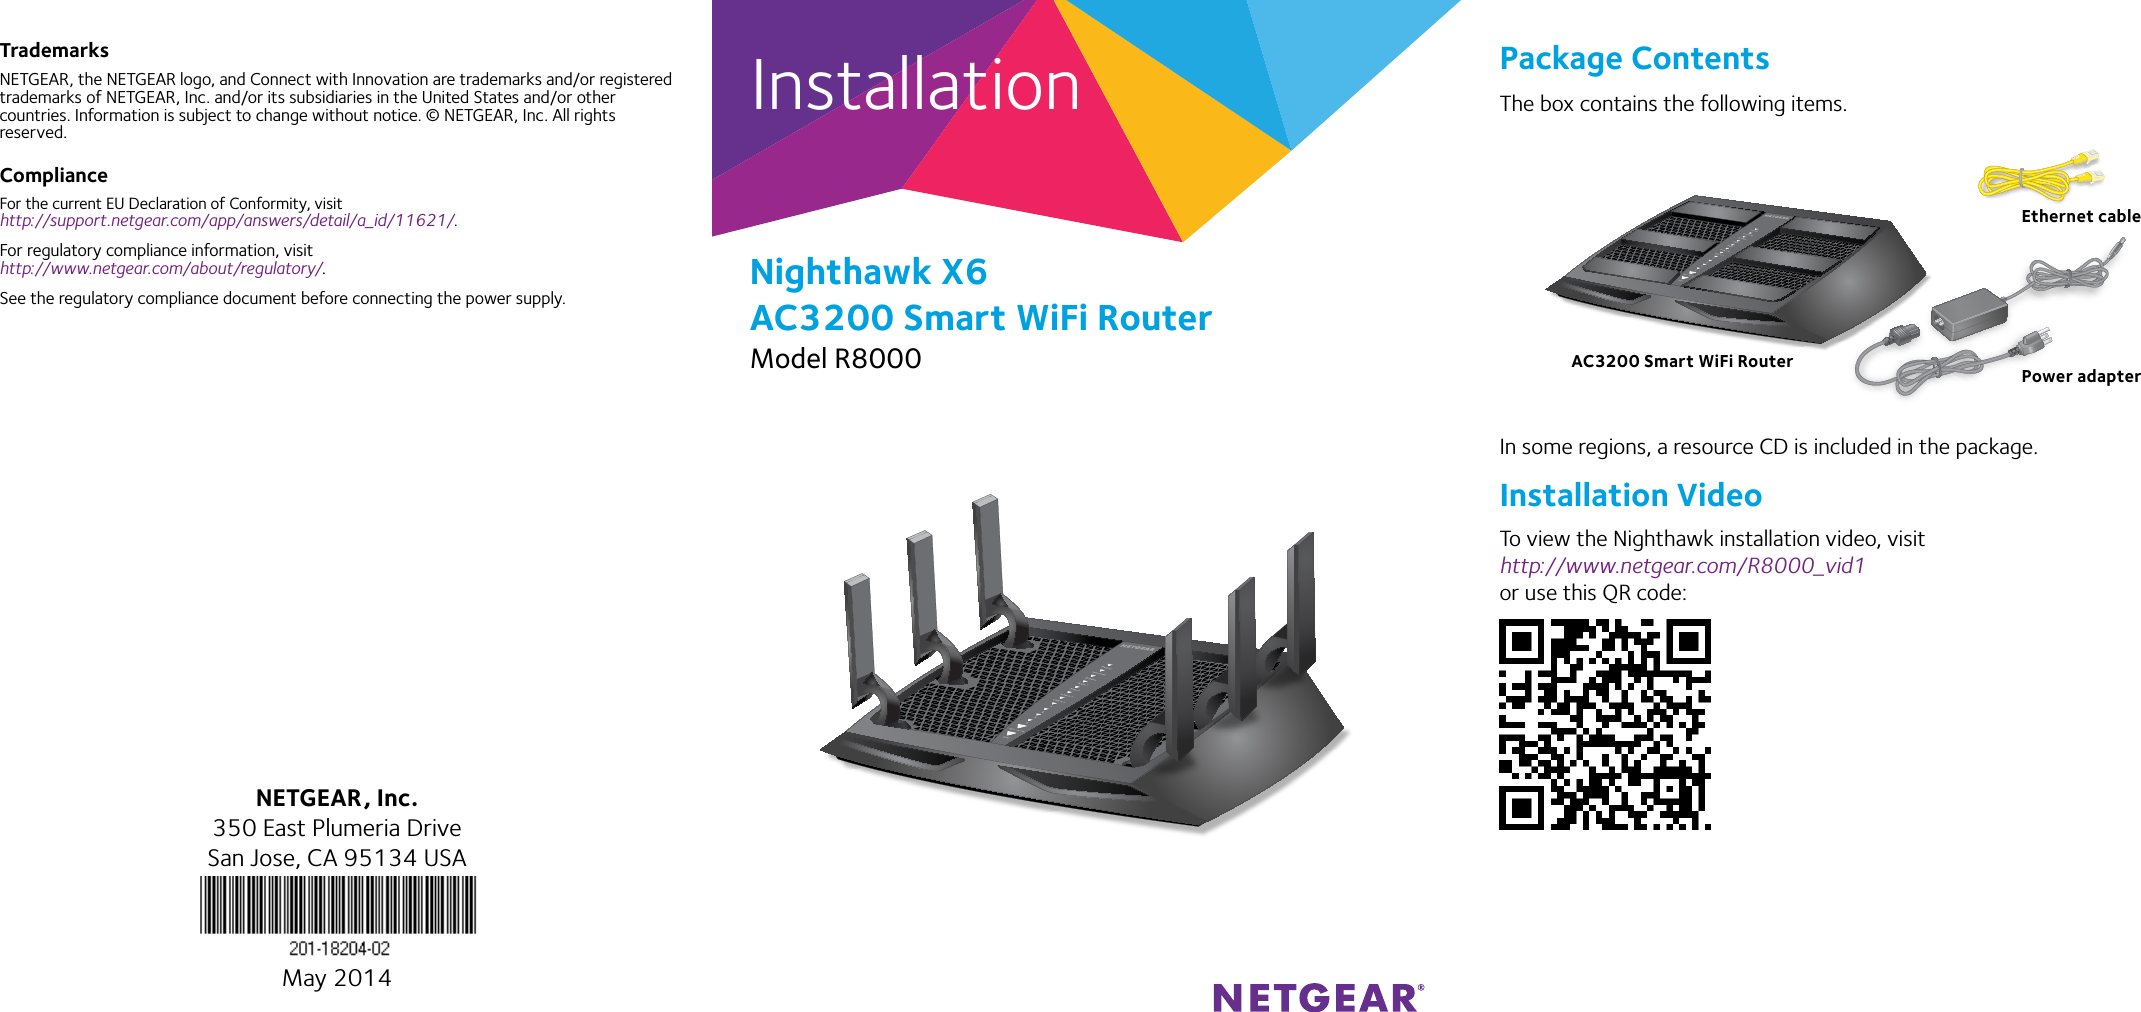 Installation Package ContentsThe box contains the following items.In some regions, a resource CD is included in the package.Installation VideoTo view the Nighthawk installation video, visit http://www.netgear.com/R8000_vid1 or use this QR code:Nighthawk X6 AC3200 Smart WiFi RouterModel R8000TrademarksNETGEAR, the NETGEAR logo, and Connect with Innovation are trademarks and/or registered trademarks of NETGEAR, Inc. and/or its subsidiaries in the United States and/or other countries. Information is subject to change without notice. © NETGEAR, Inc. All rights reserved.ComplianceFor the current EU Declaration of Conformity, visit http://support.netgear.com/app/answers/detail/a_id/11621/.For regulatory compliance information, visit http://www.netgear.com/about/regulatory/.See the regulatory compliance document before connecting the power supply.NETGEAR, Inc.350 East Plumeria DriveSan Jose, CA 95134 USAMay 2014AC3200 Smart WiFi RouterEthernet cablePower adapter